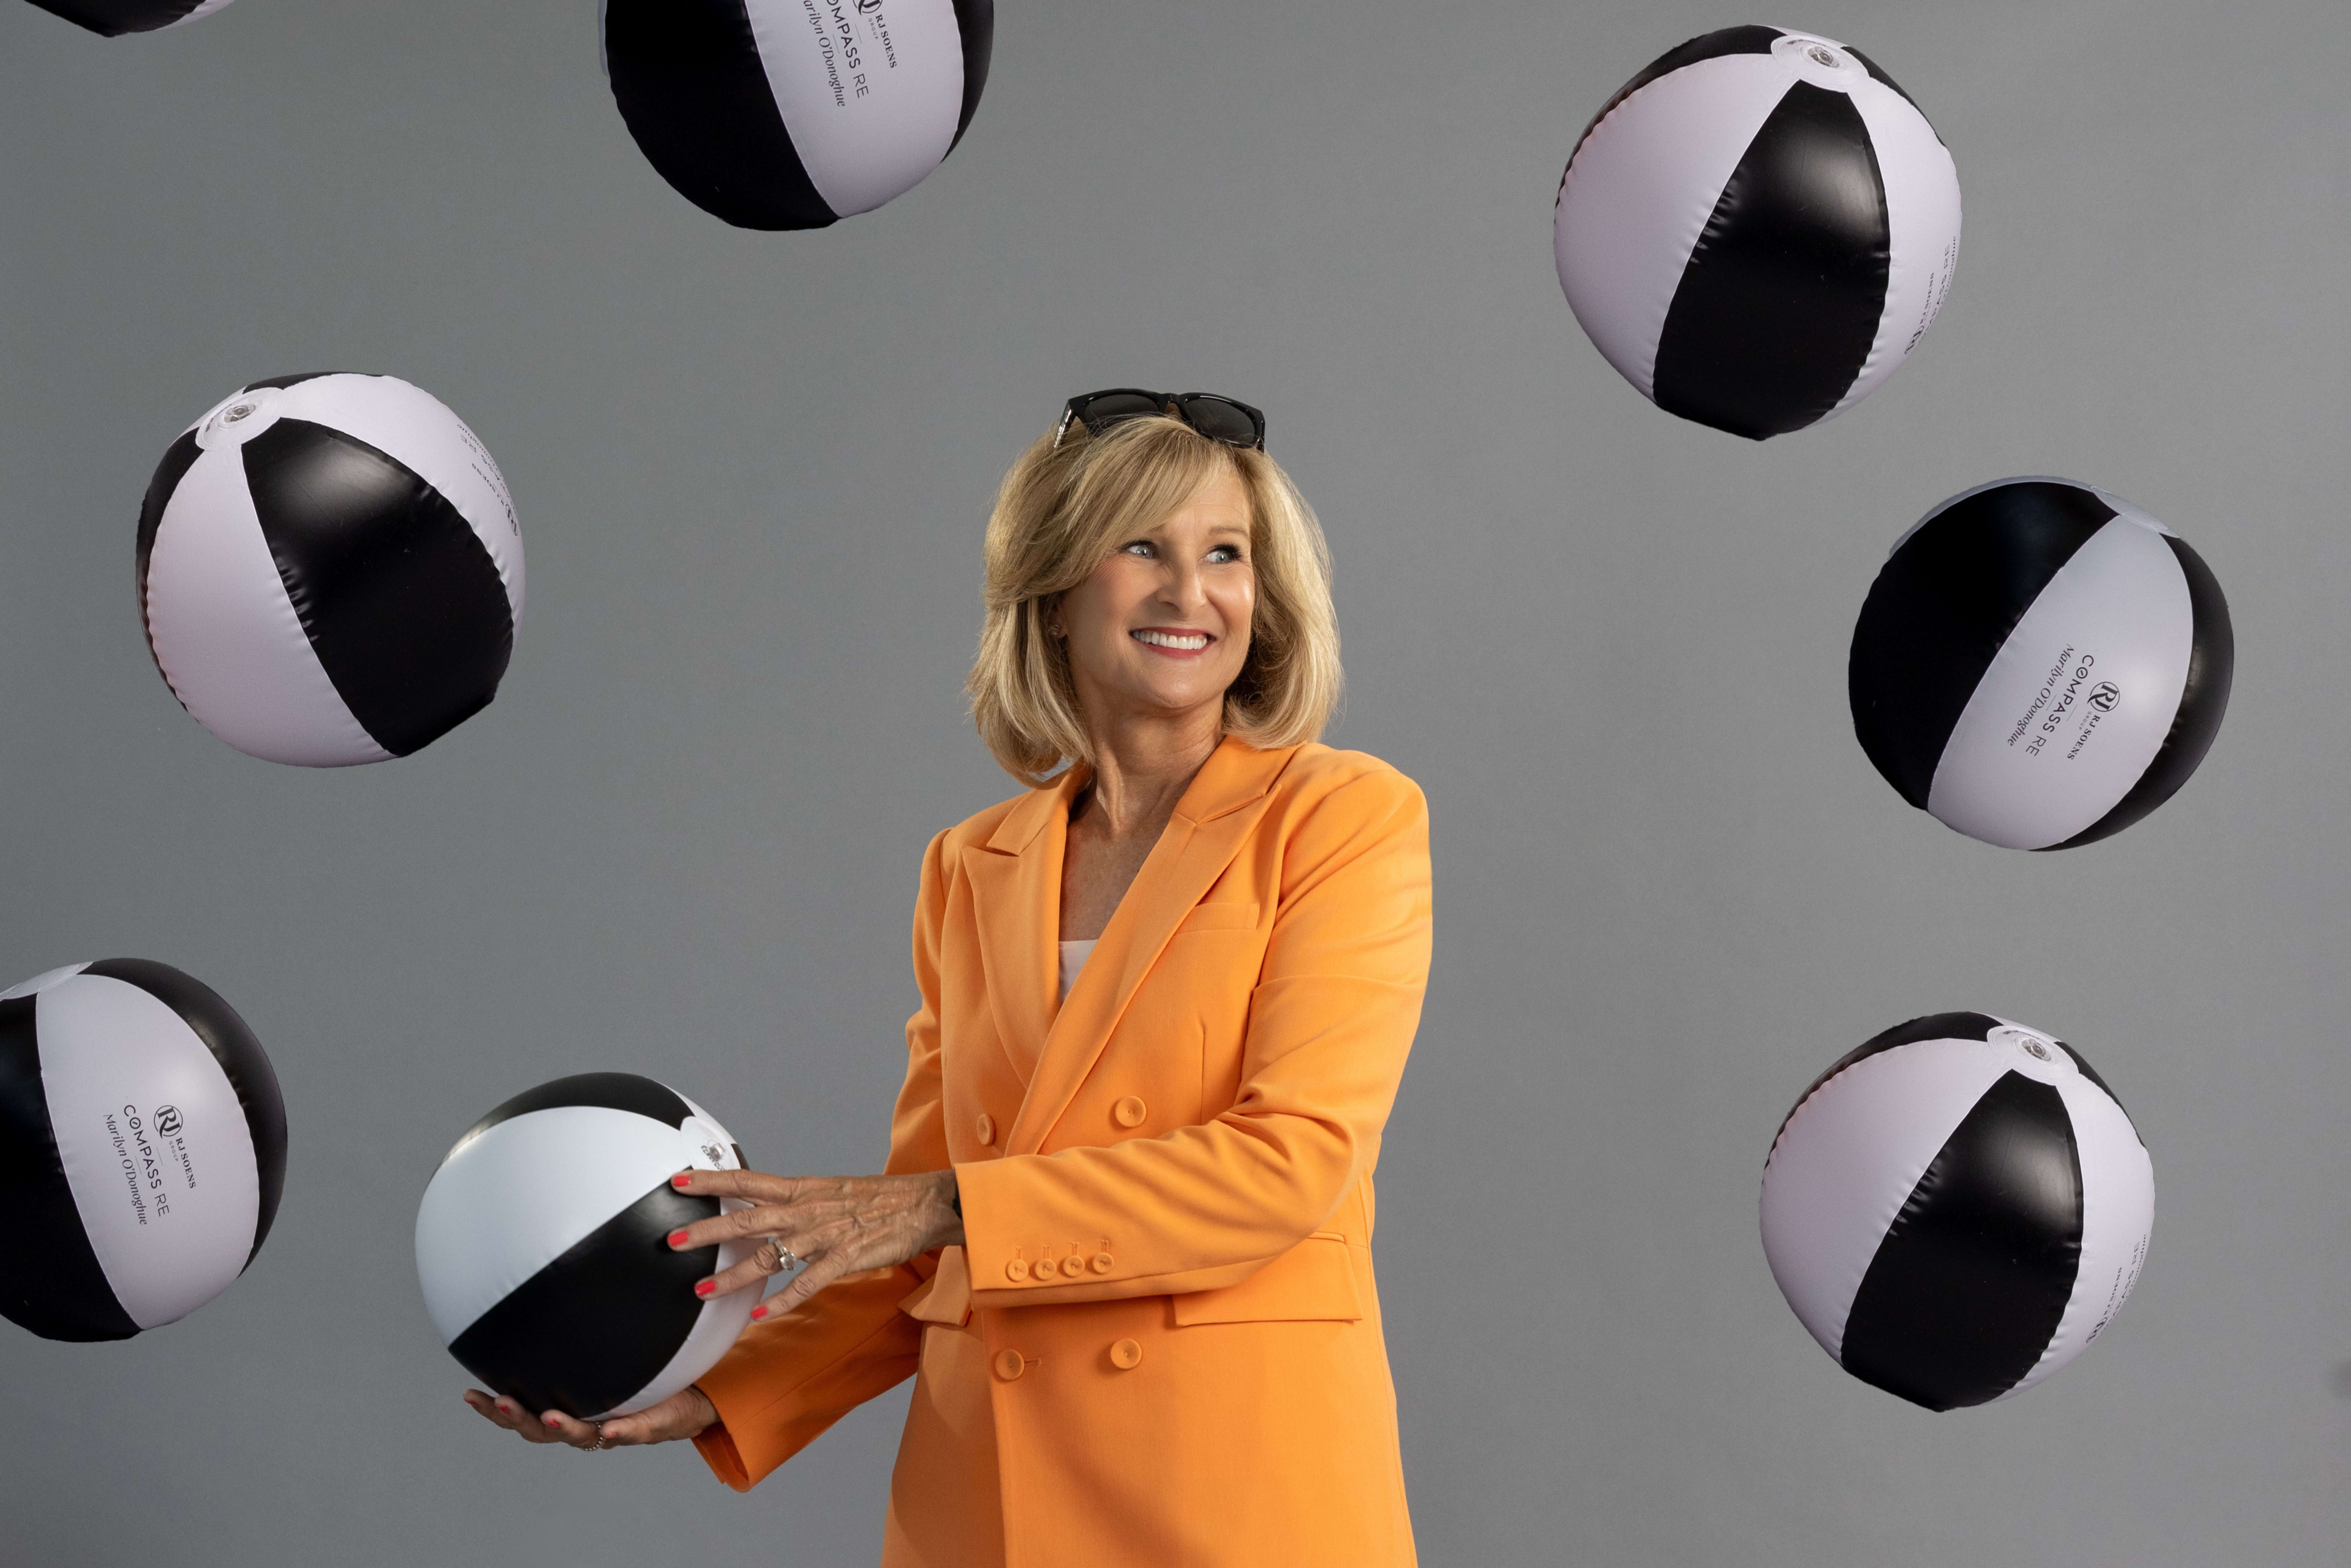 A blonde woman in an orange suit holding and throwing up a bunch of white and black beach balls